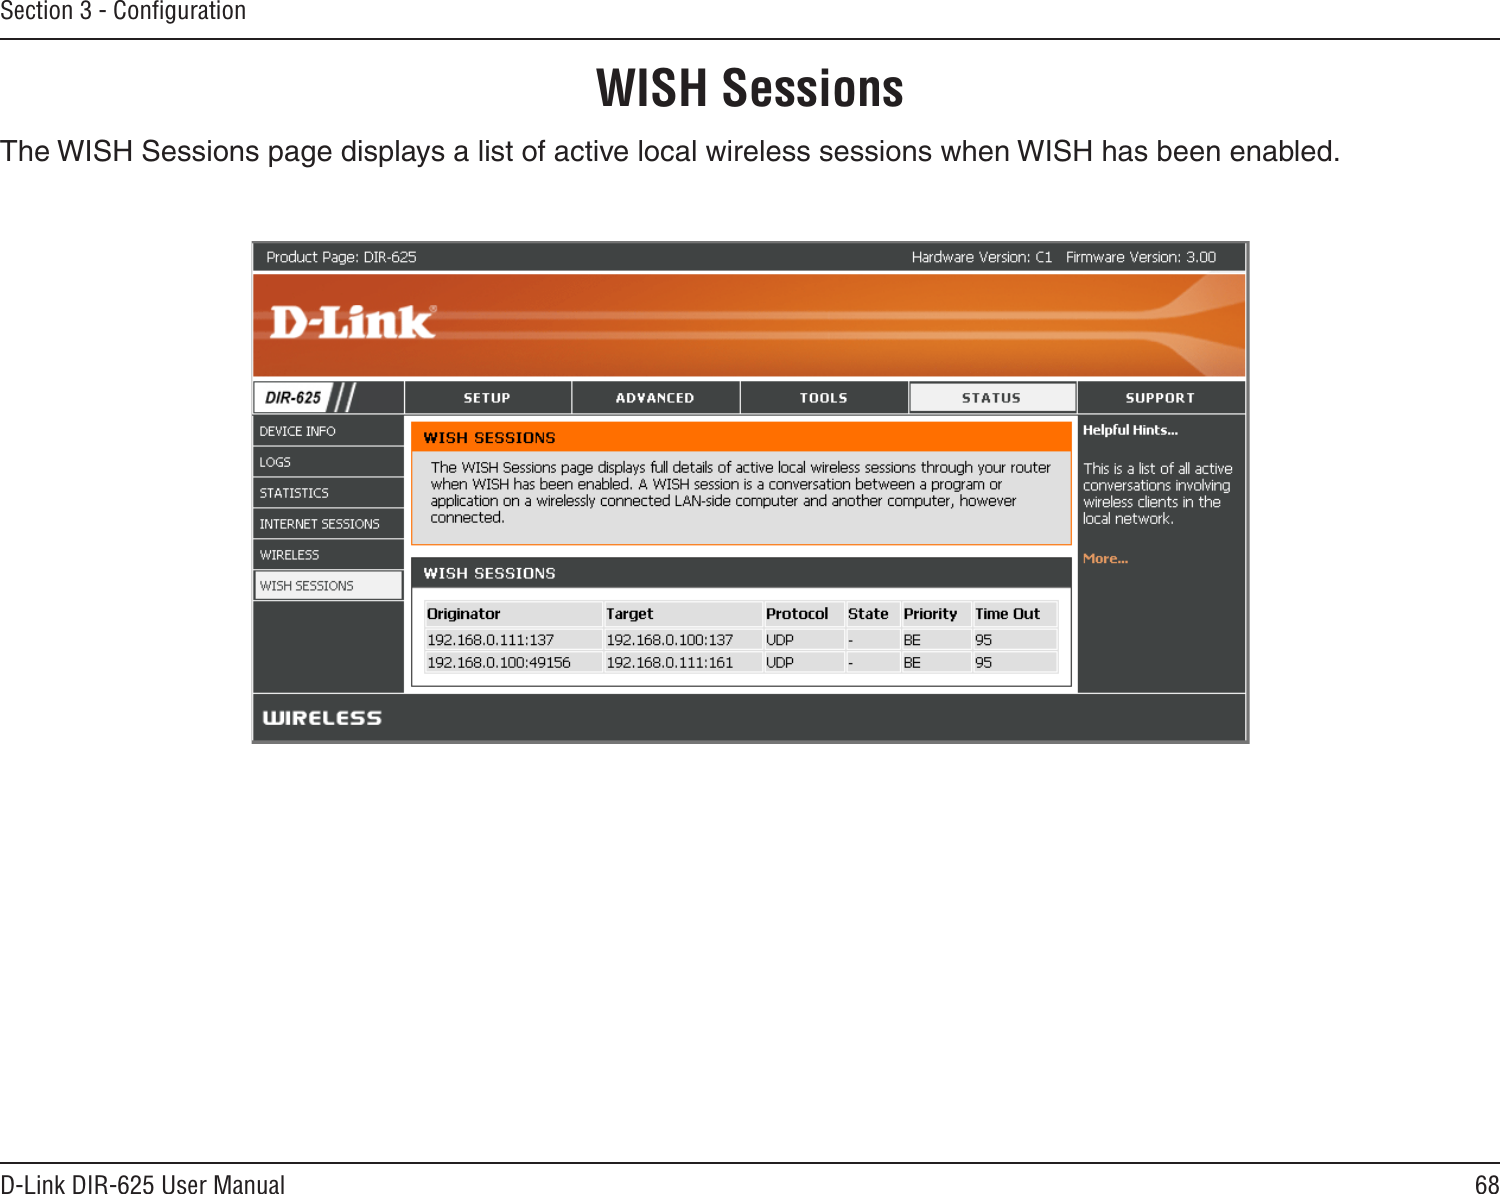 68D-Link DIR-625 User ManualSection 3 - ConﬁgurationThe WISH Sessions page displays a list of active local wireless sessions when WISH has been enabled.WISH Sessions